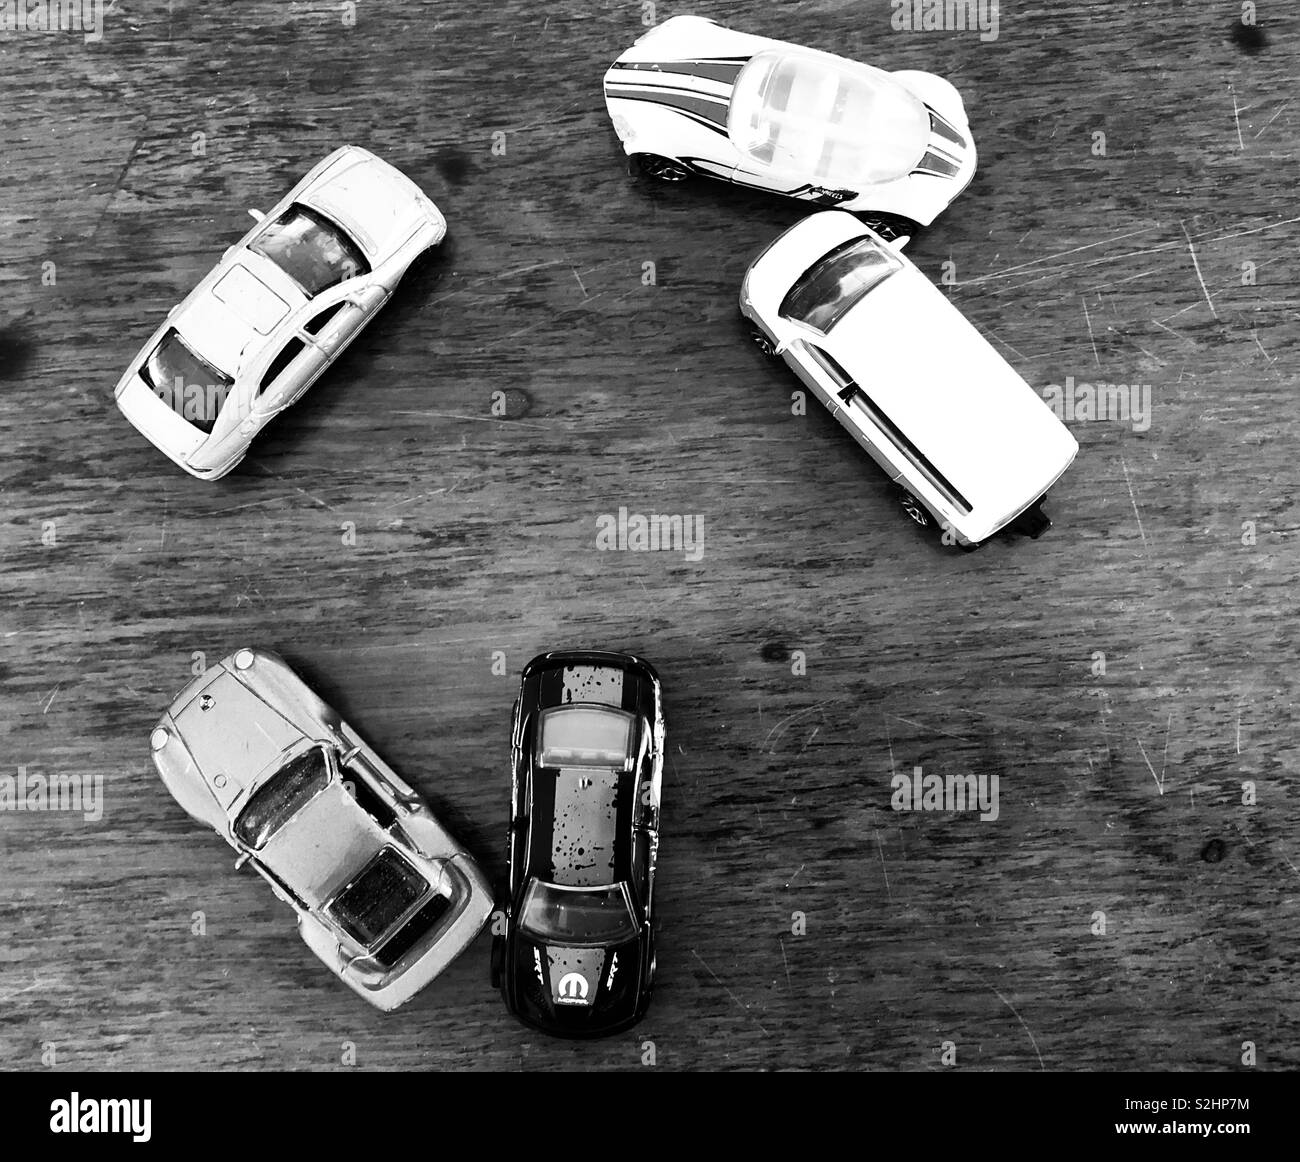 Toy cars on wooden background Stock Photo